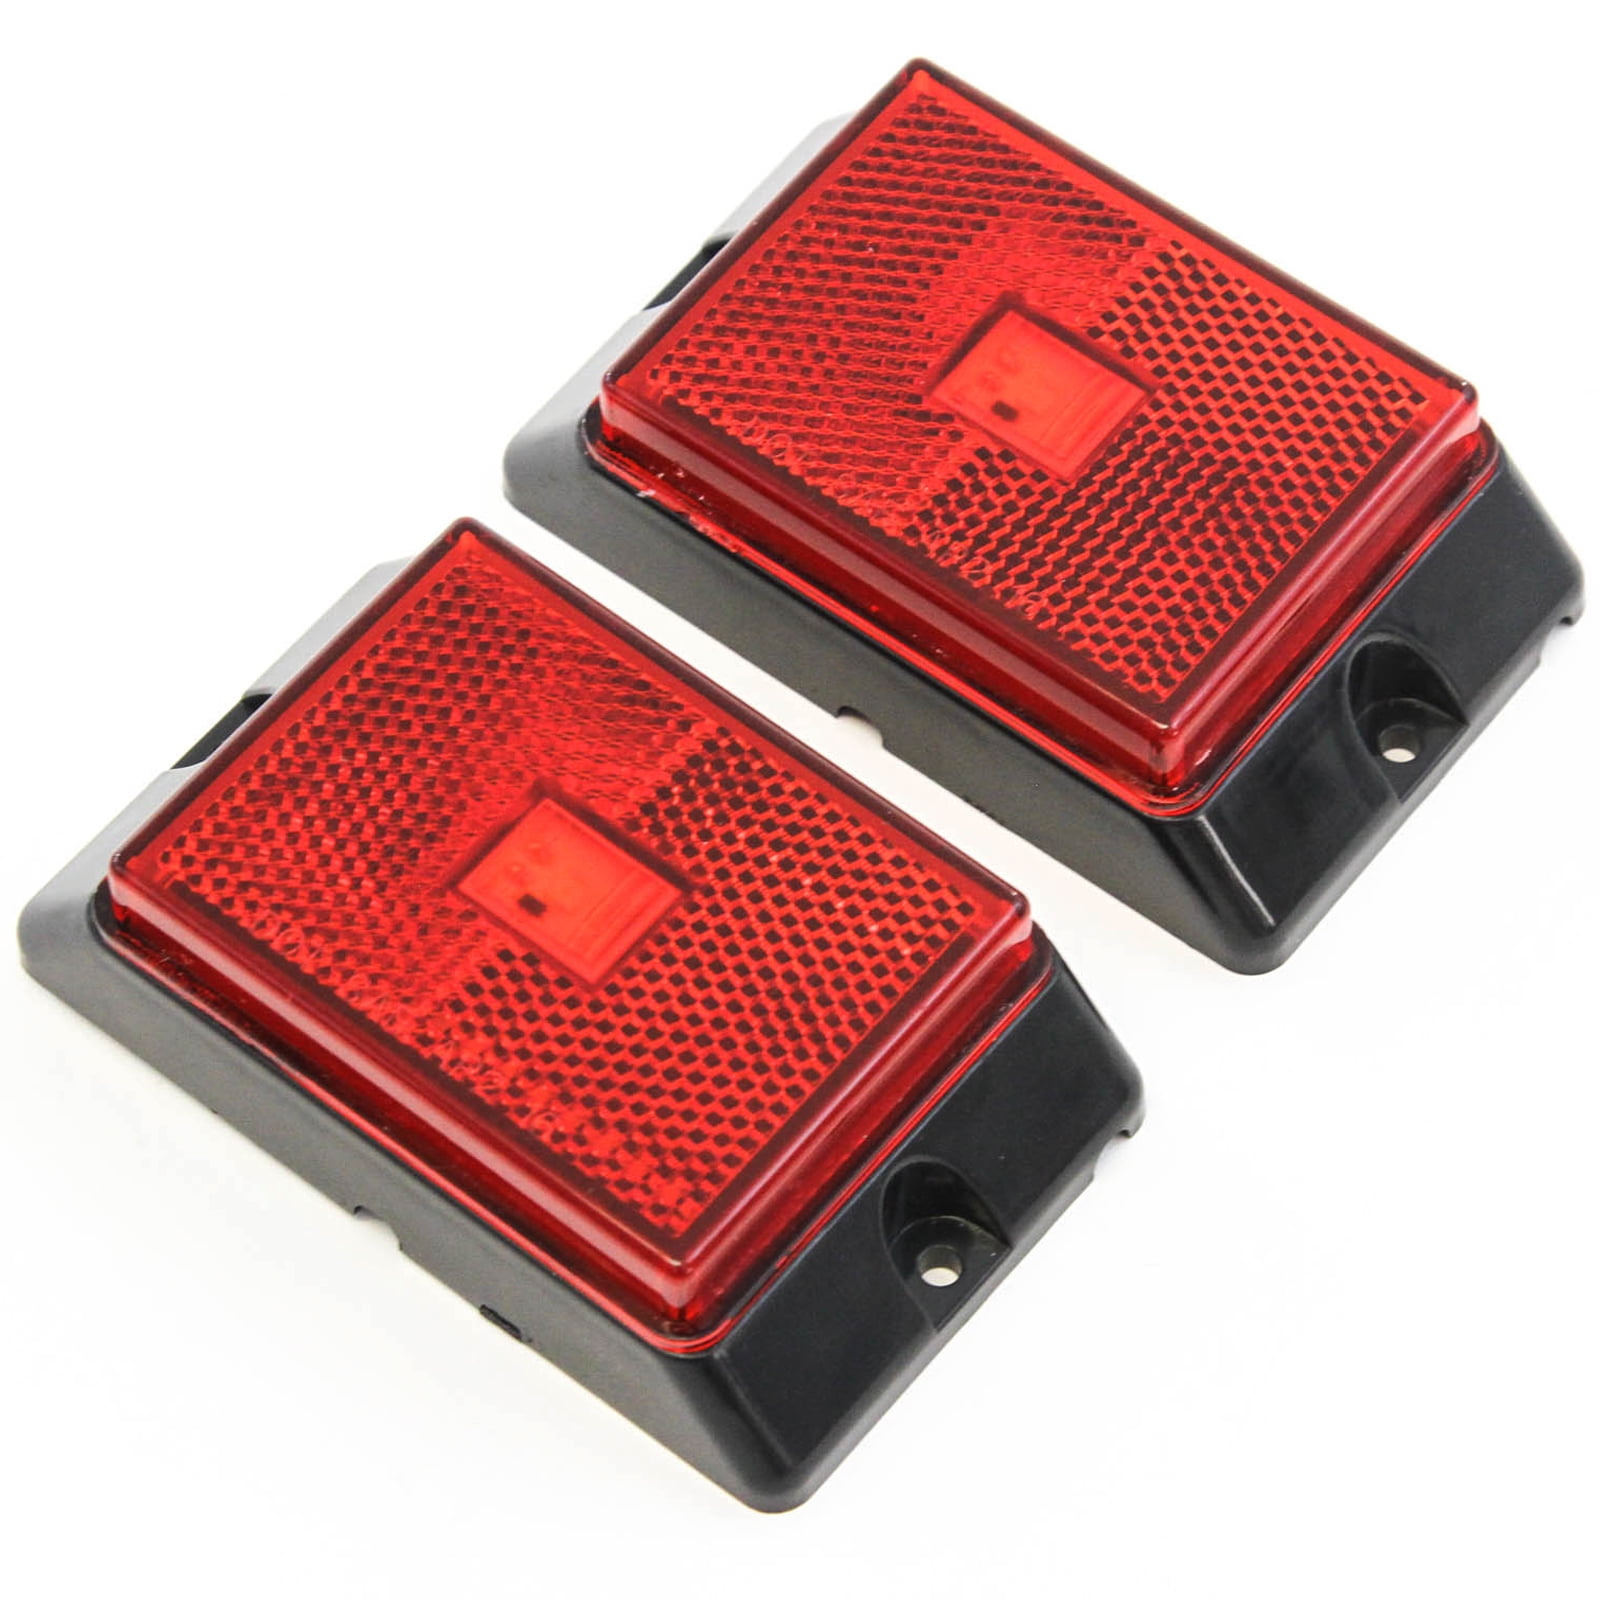 2 Red LED Side Marker Lights 4 Inches Truck Trailer Pickup Boat Bright ...